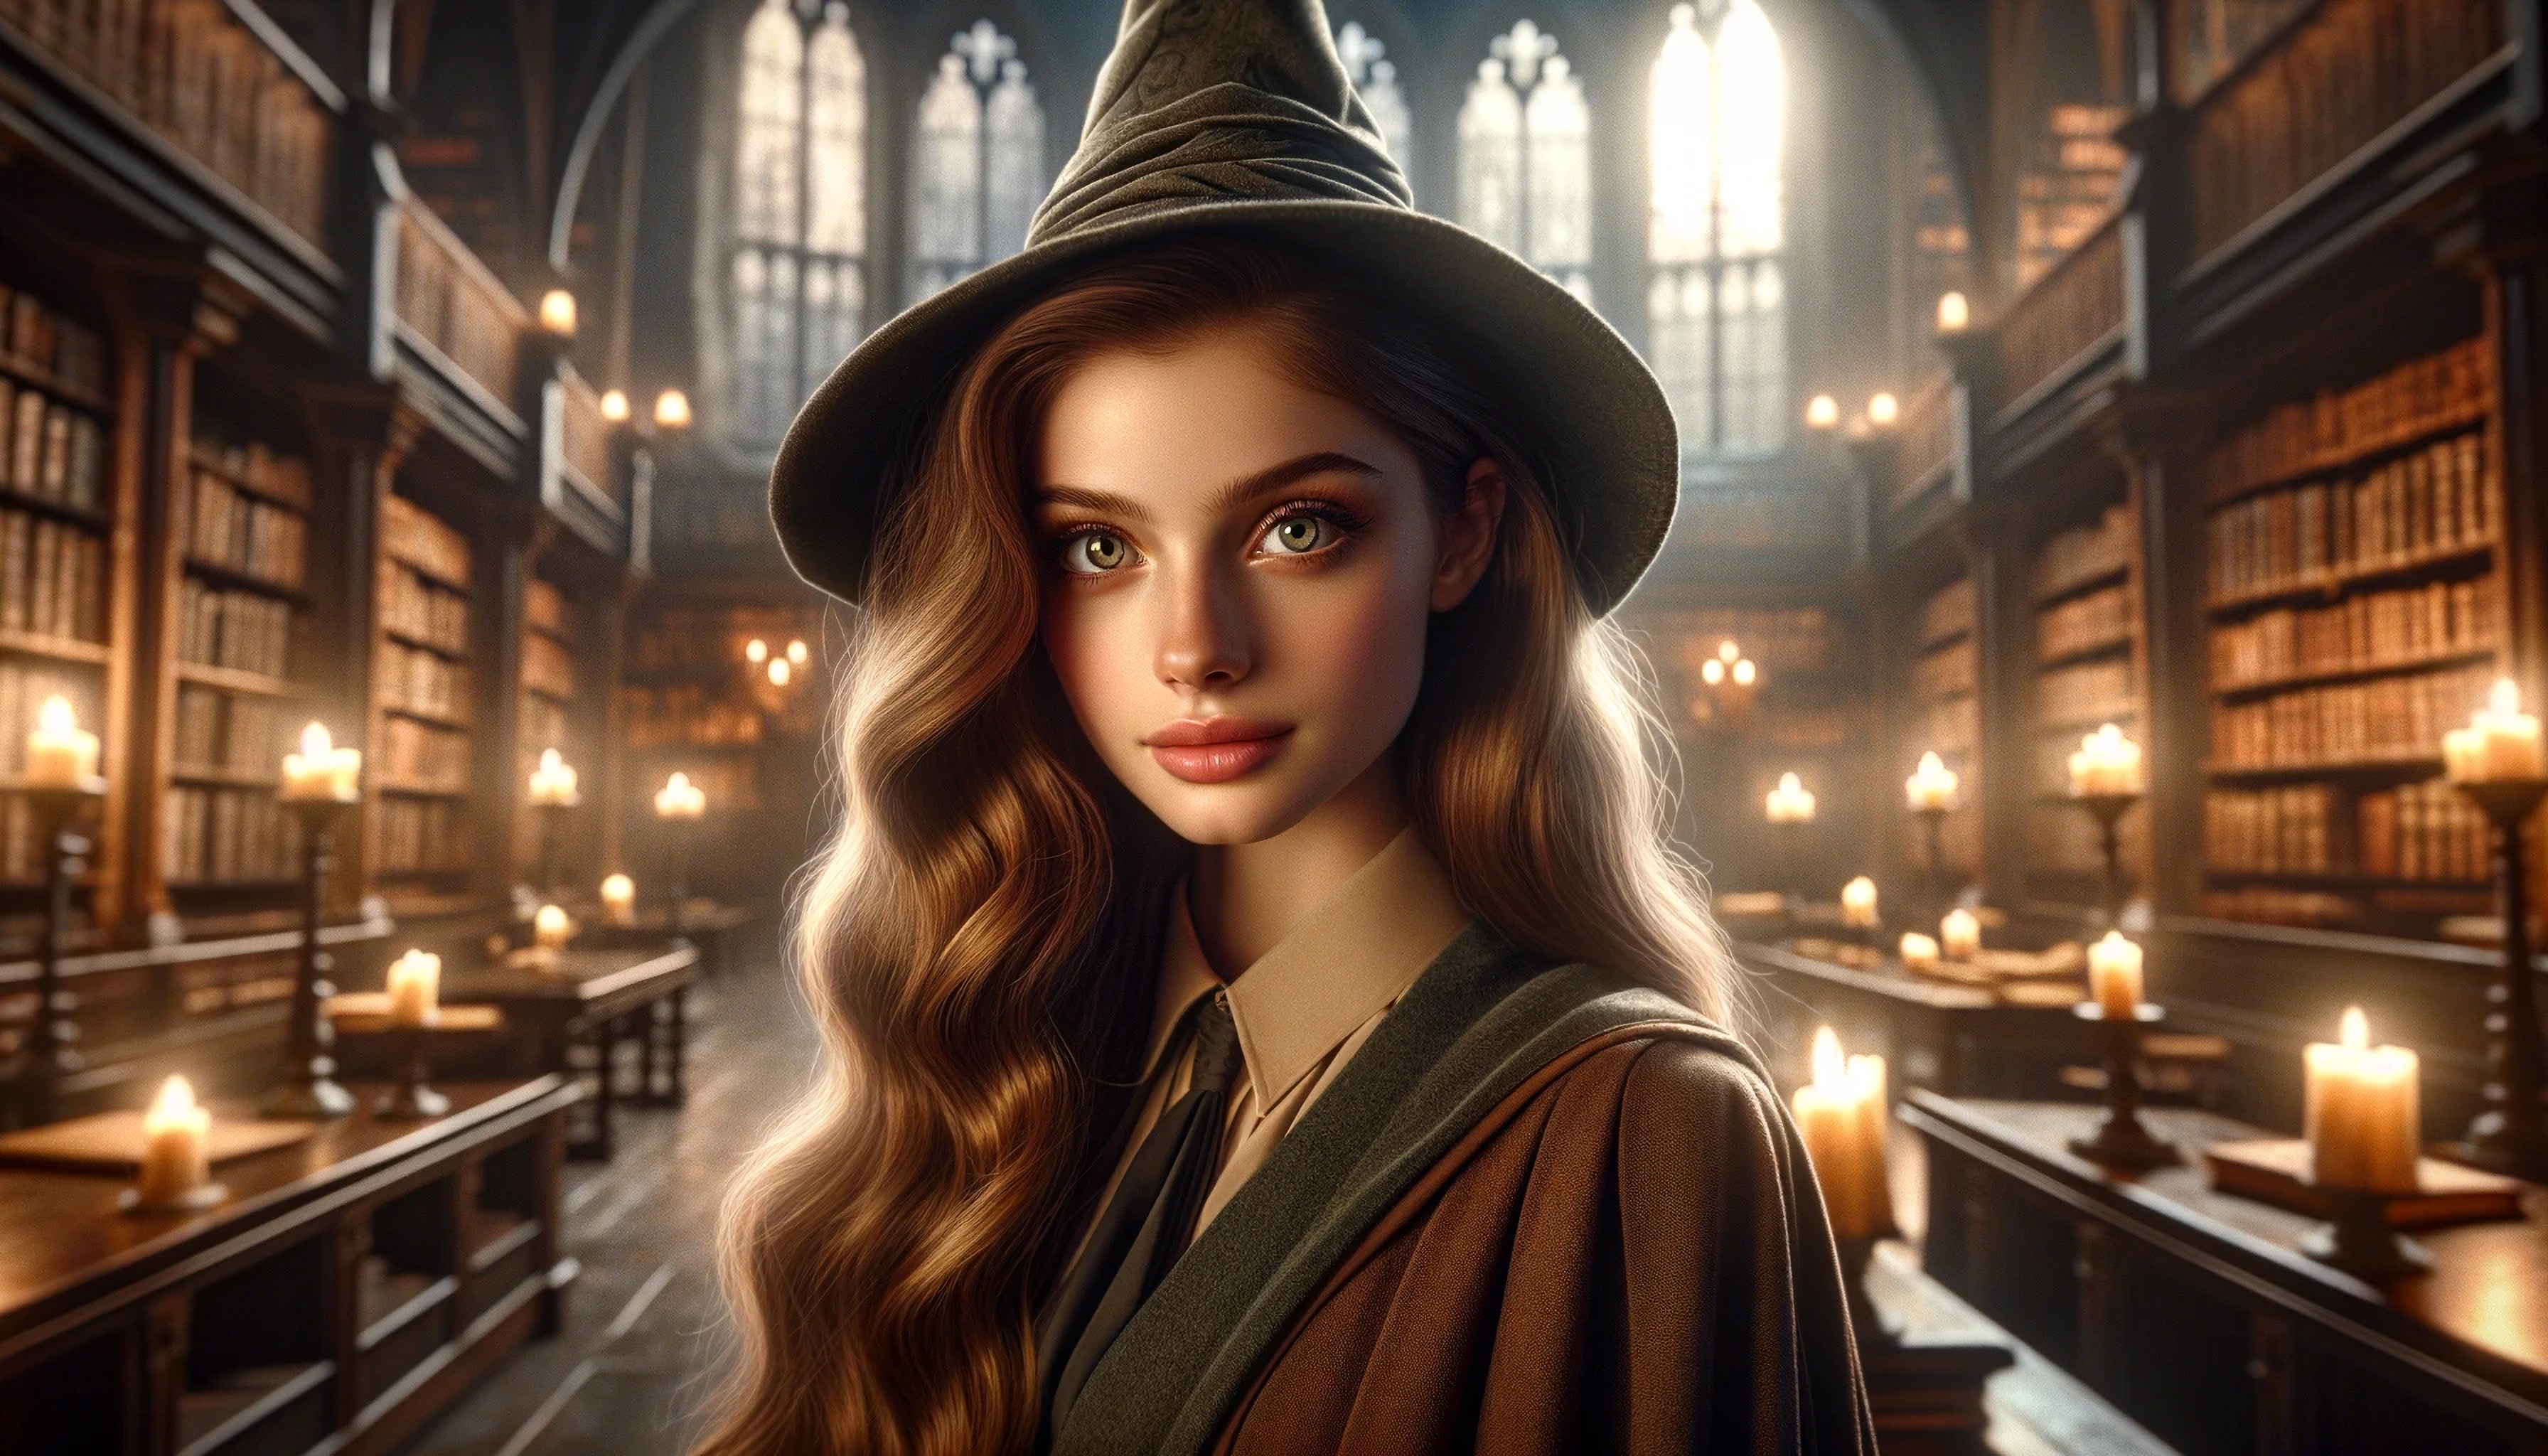 General 3584x2048 AI art digital art portrait wizard's hat wizarding world library candles looking at viewer closed mouth wizard blurred blurry background long hair wavy hair window robes blue eyes books desk